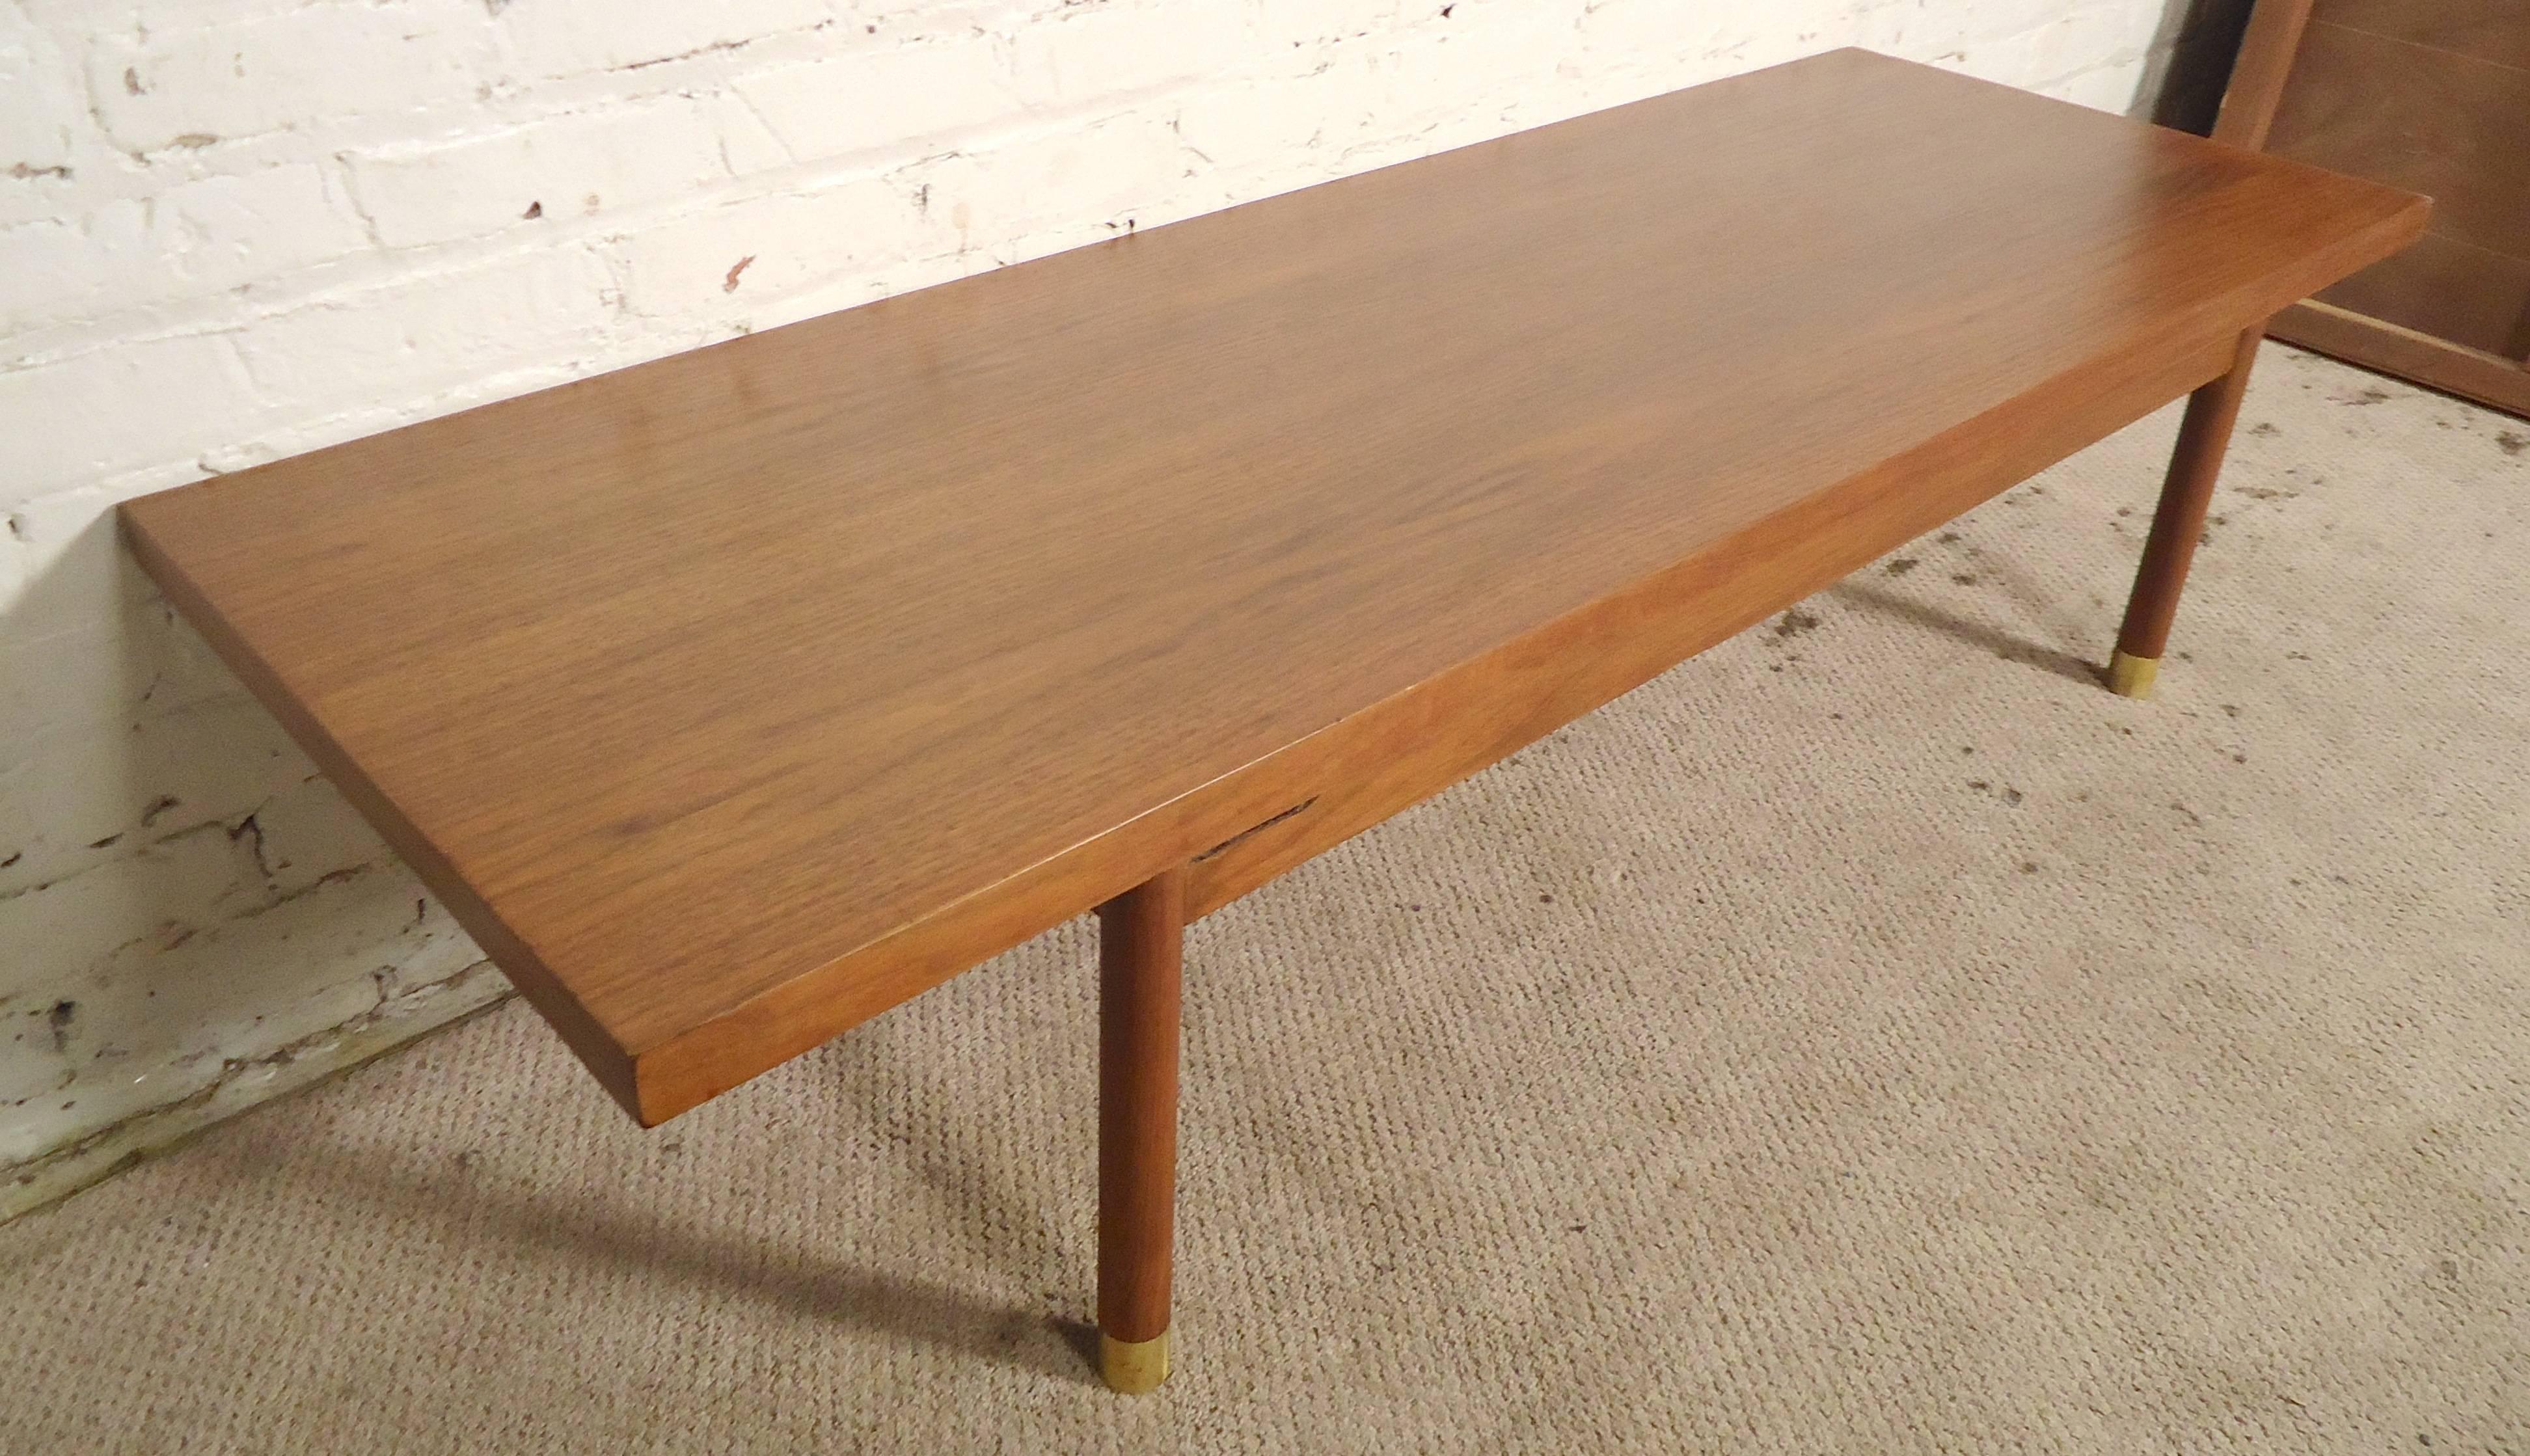 Midcentury table with warm walnut grain. Long top, round legs with brass caps.

(Please confirm item location - NY or NJ - with dealer).
  